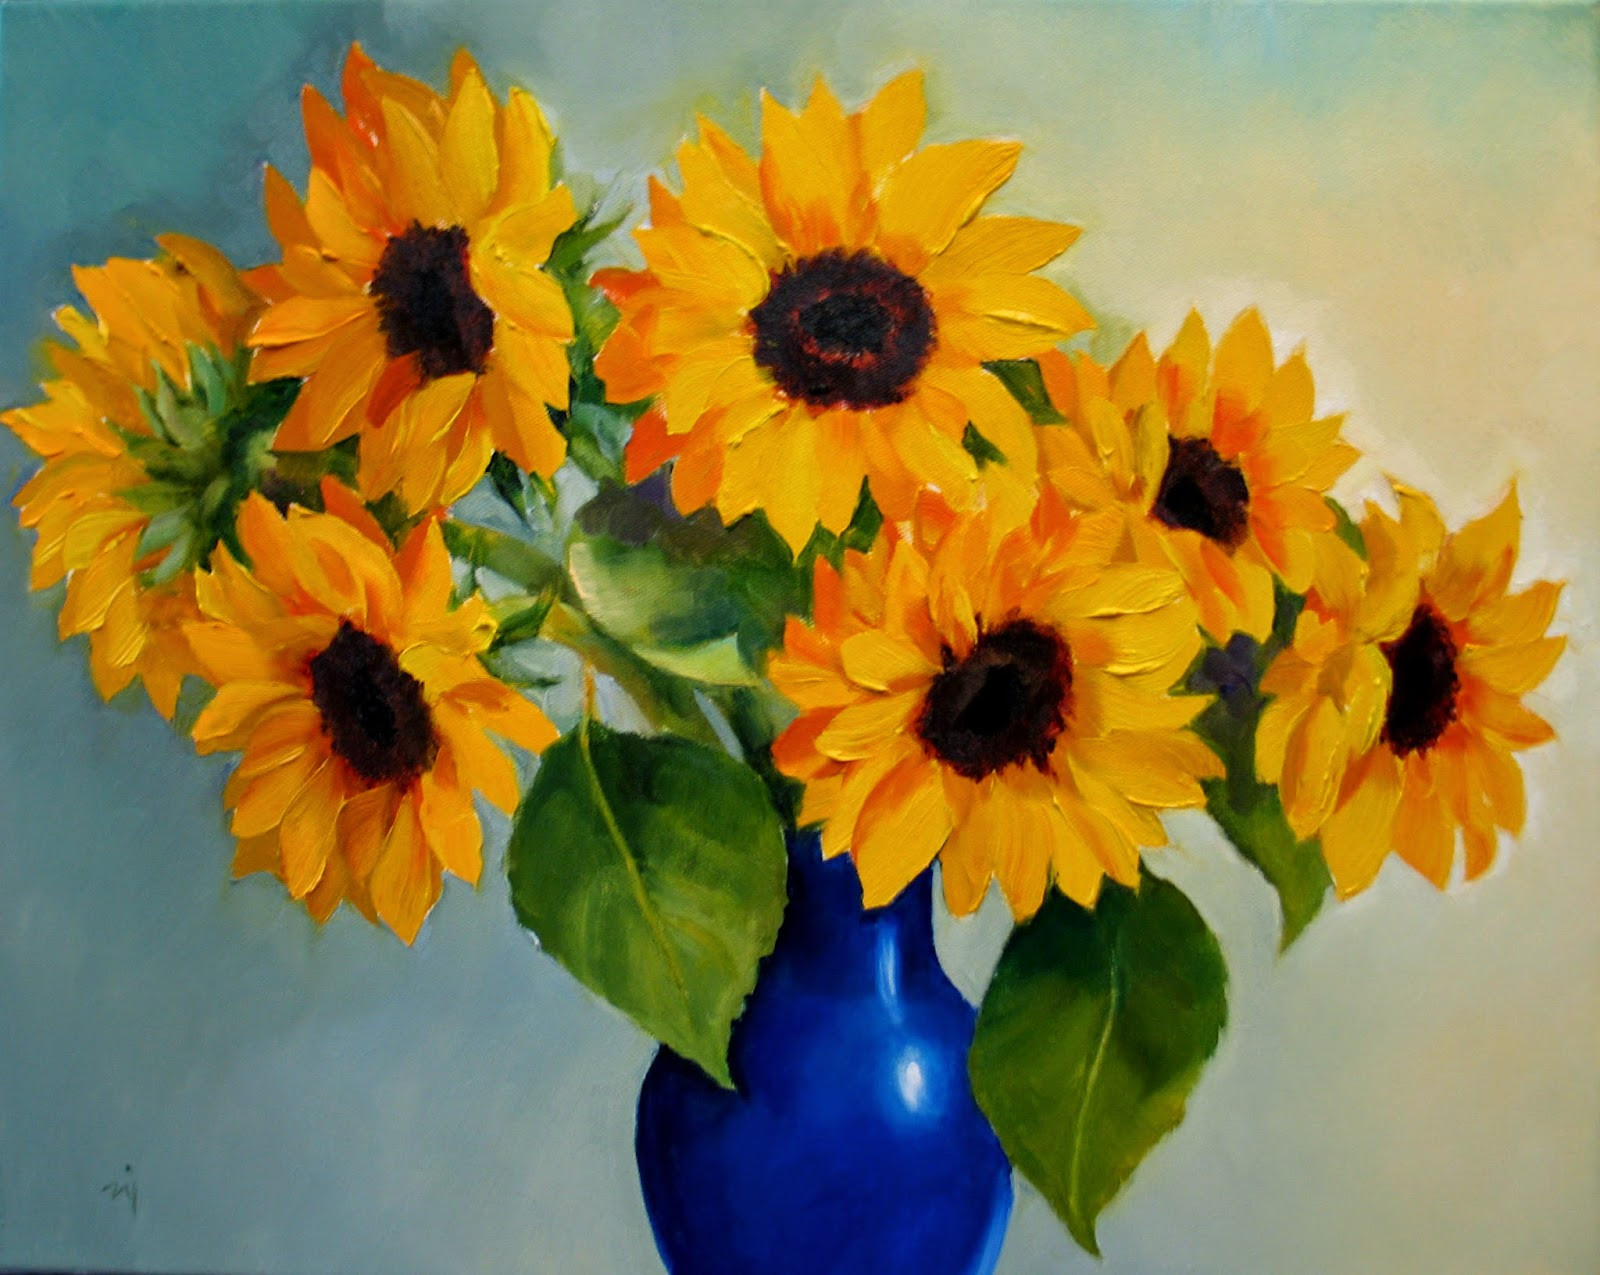 11 Recommended Sunflowers Blue Vase 2024 free download sunflowers blue vase of sunflowers in a blue vase with regard to nels everyday painting sunflowers in blue vase sold